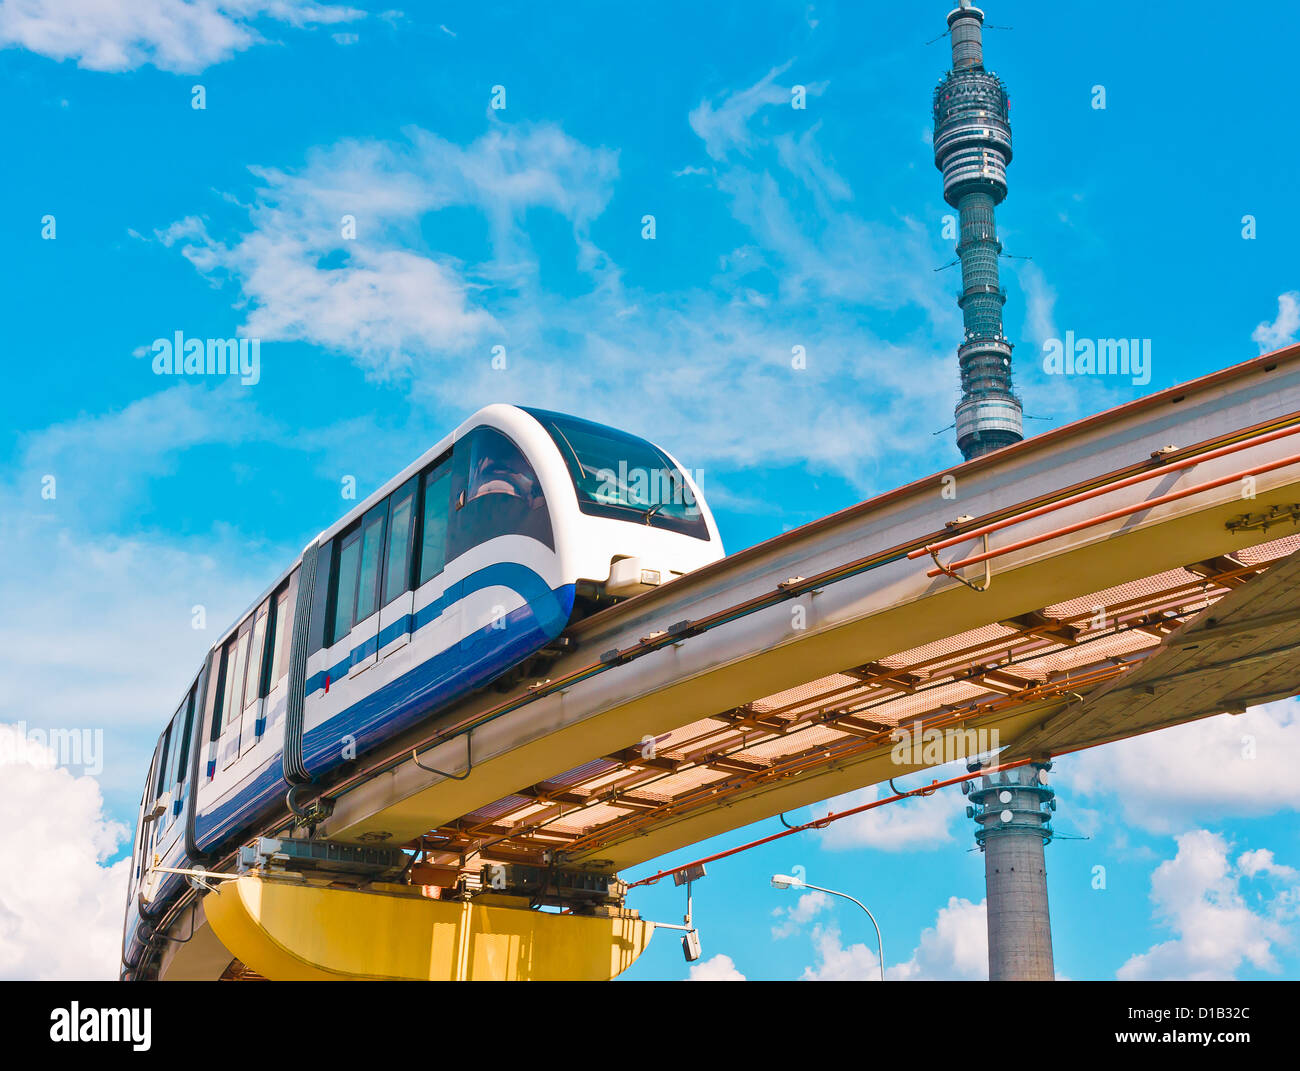 Cityscape with TV tower and monorail train Stock Photo